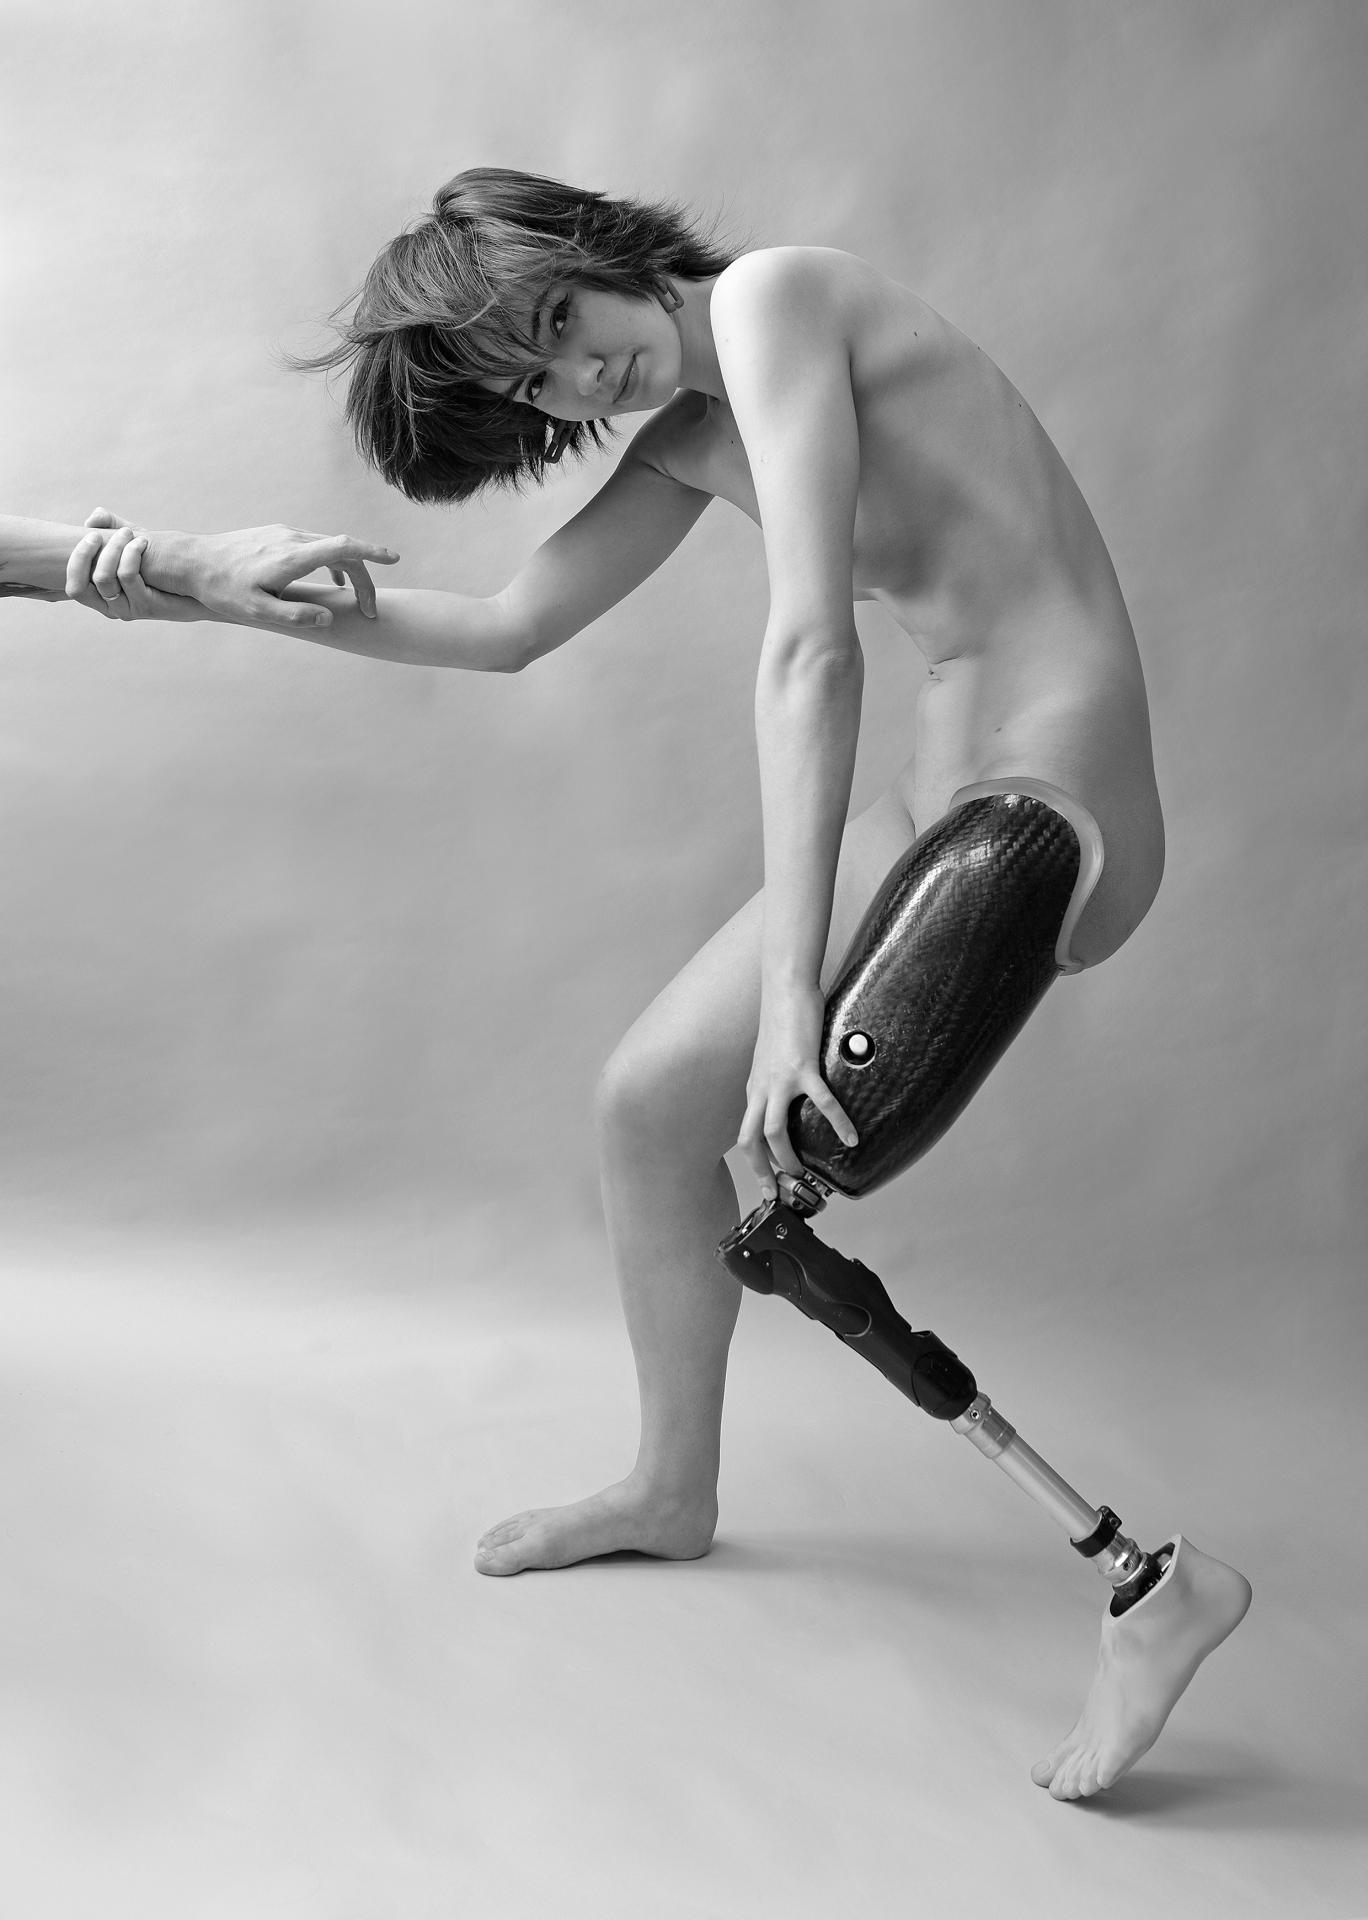 London Photography Awards Winner - Life On A Prosthesis.